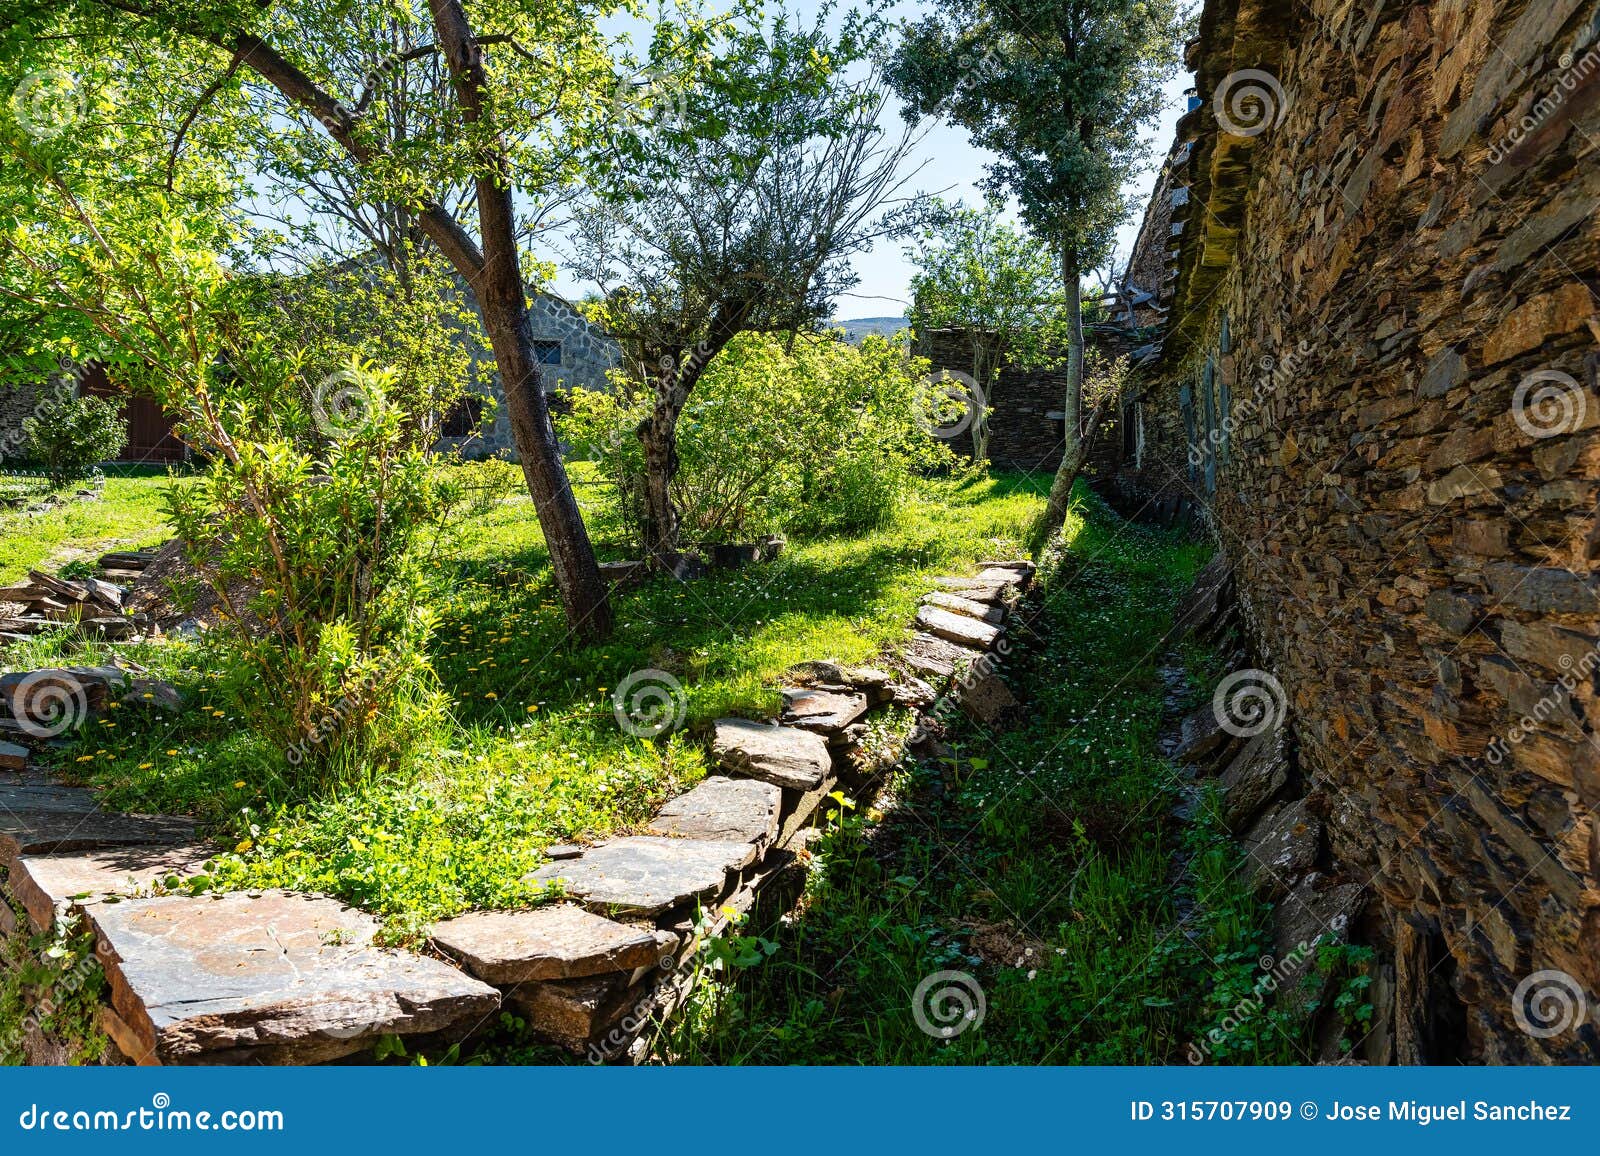 green grassy meadow with stone walls in high mountain, black villages, majaelrayo